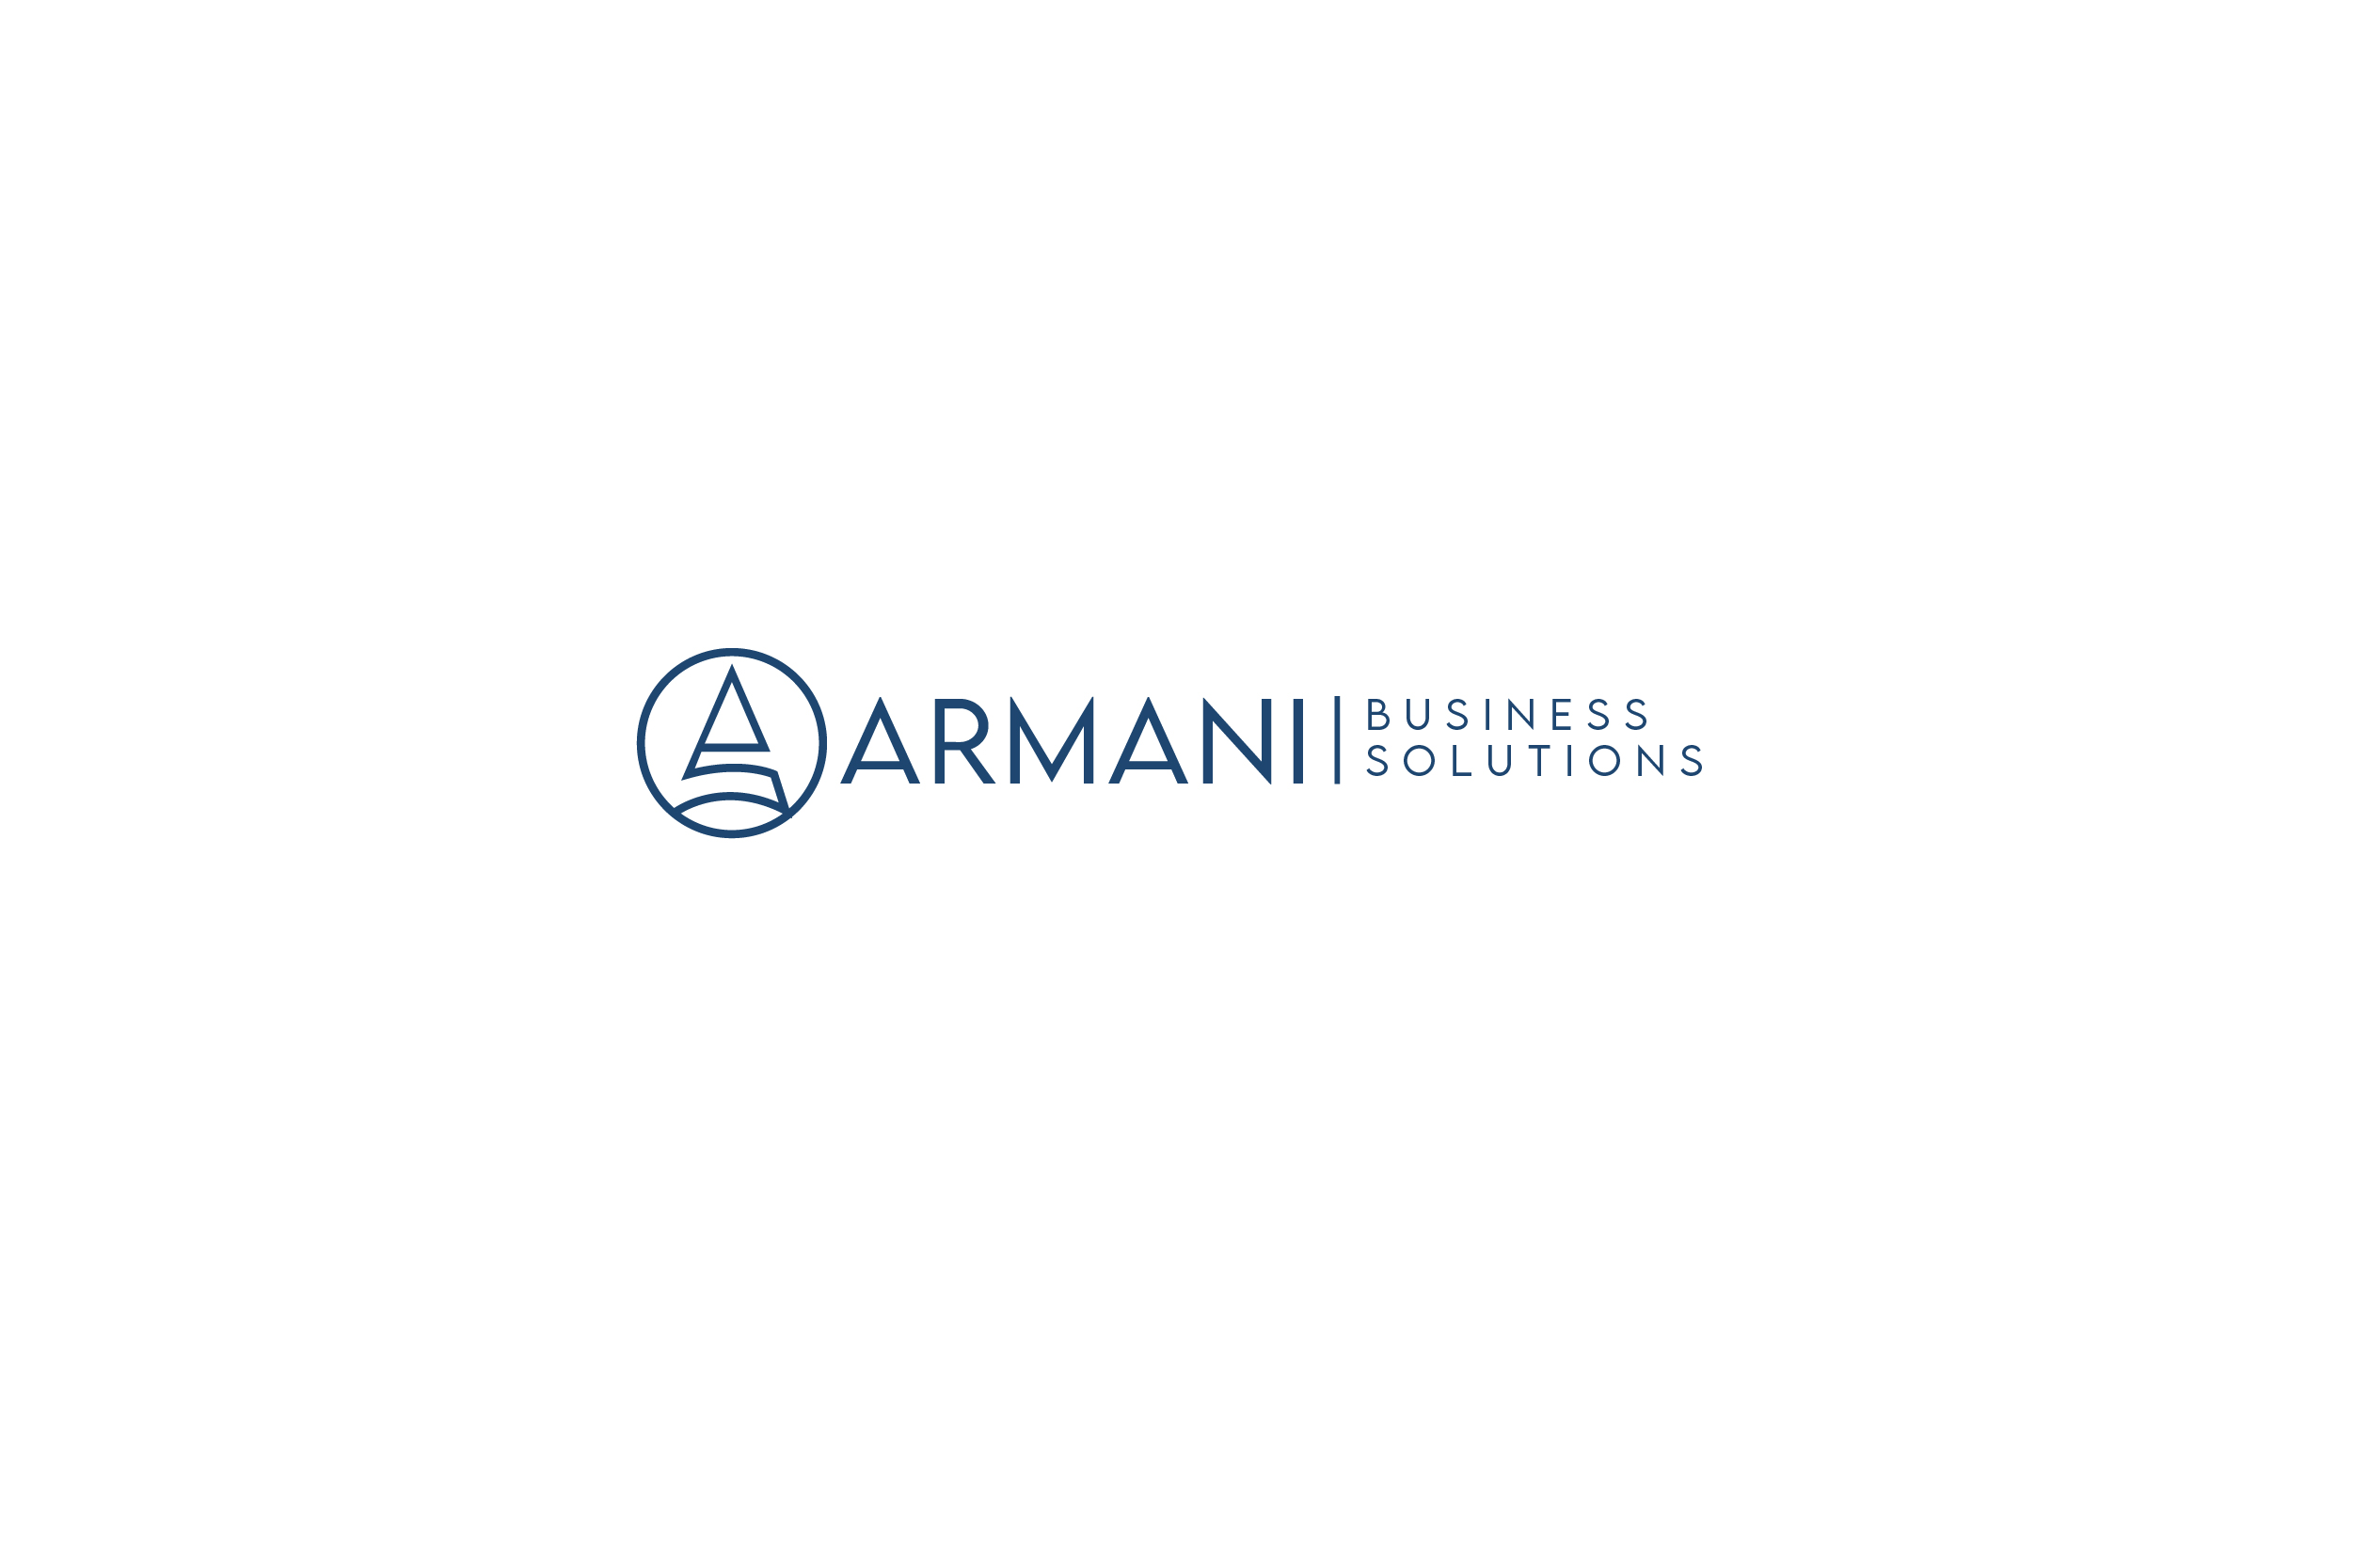 Armani Business Solutions